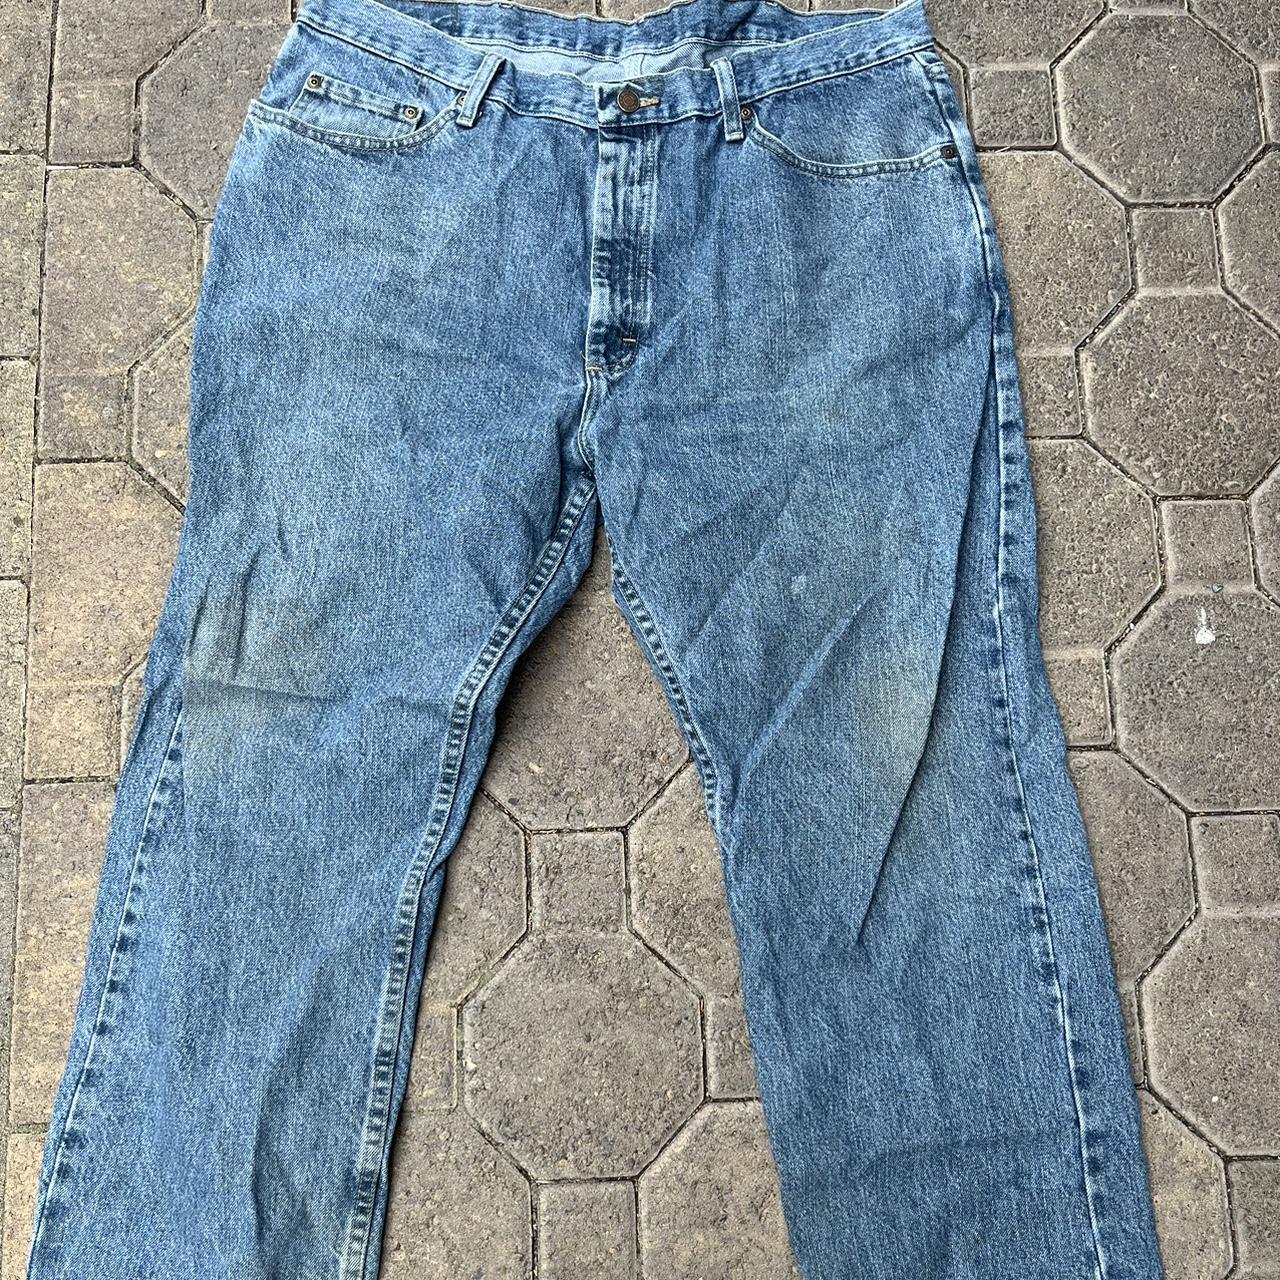 Used Size 40x30 Wrangler Jeans. Very but not... - Depop